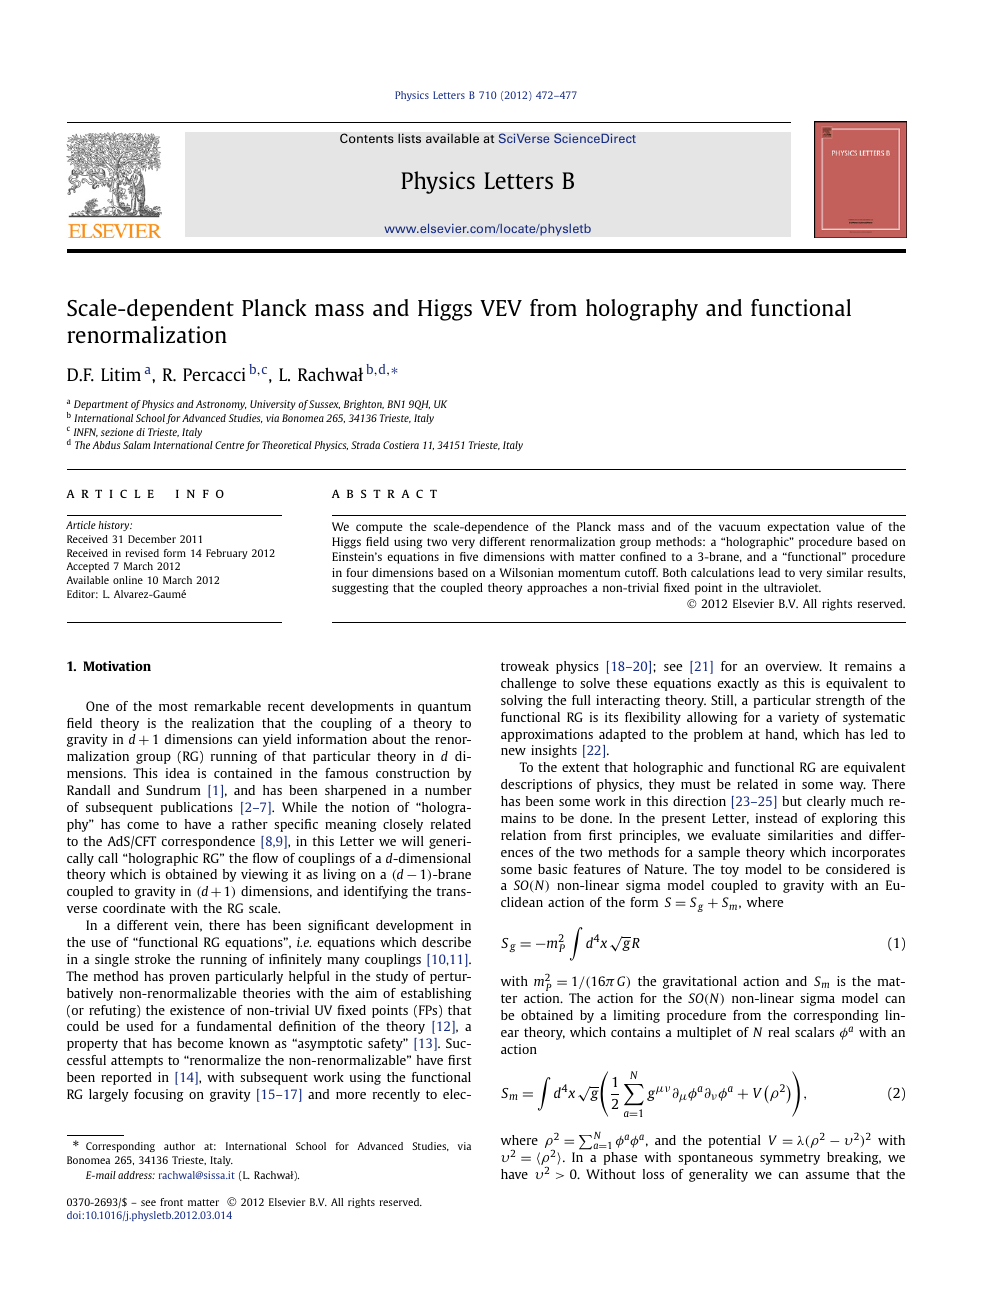 Scale Dependent Planck Mass And Higgs Vev From Holography And Functional Renormalization Topic Of Research Paper In Physical Sciences Download Scholarly Article Pdf And Read For Free On Cyberleninka Open Science Hub